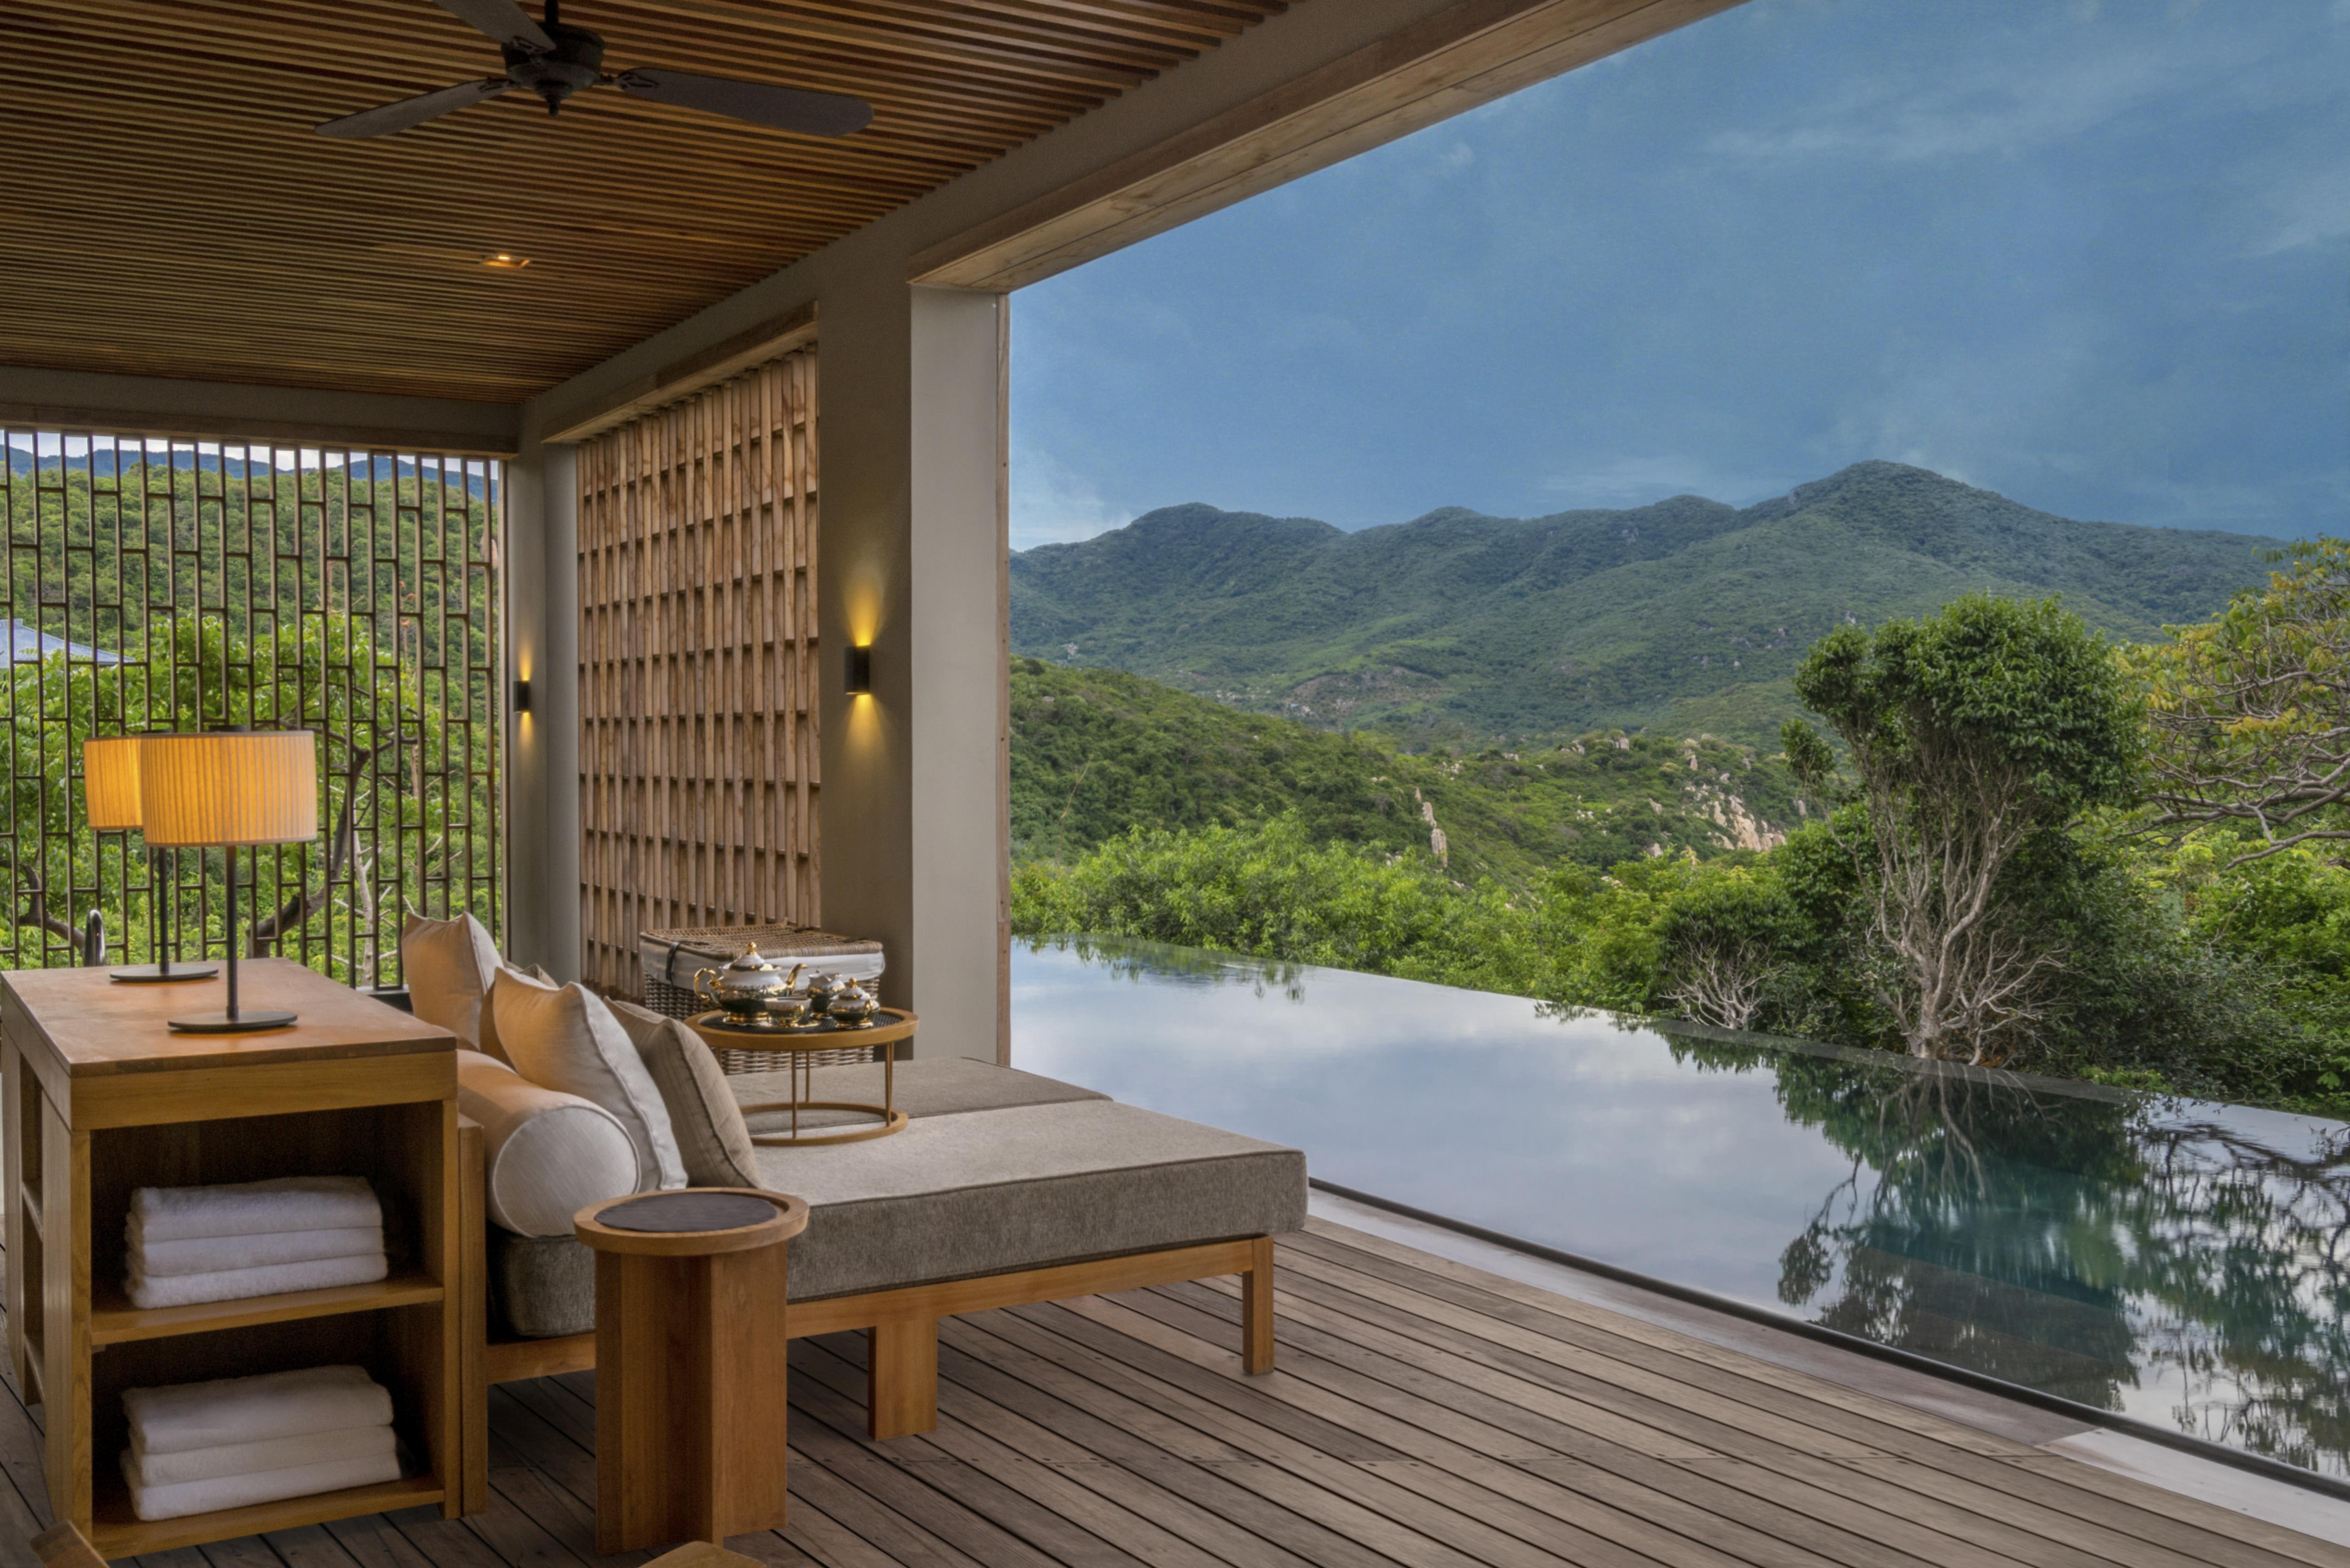 wooden open air seating, overlooking infinity pool and green mountains